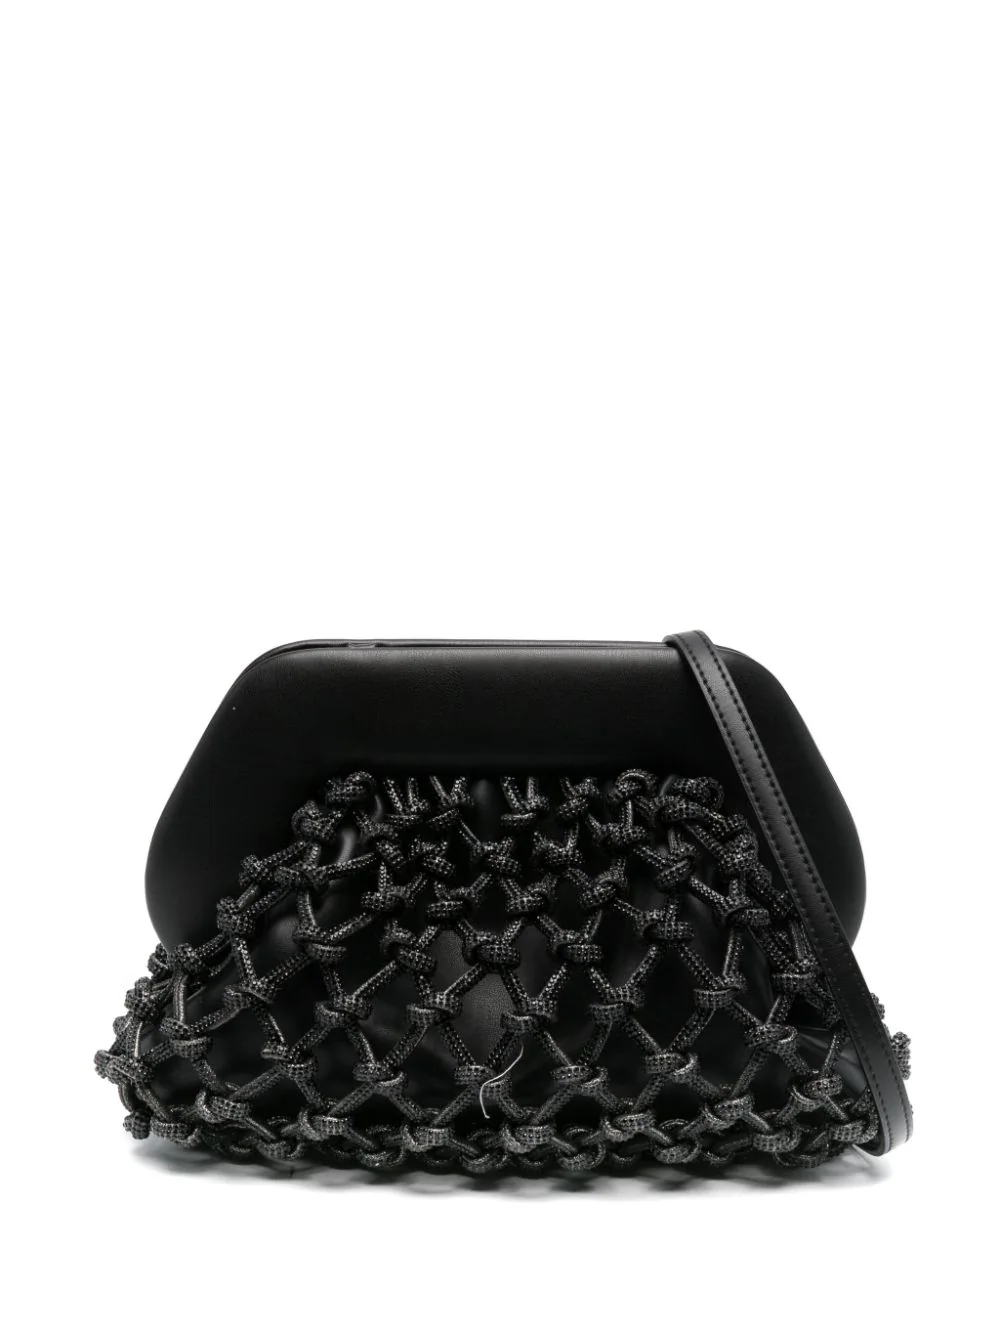 Shop Themoire' Tia Clutch Bag Embellished With Rhinestones In Black